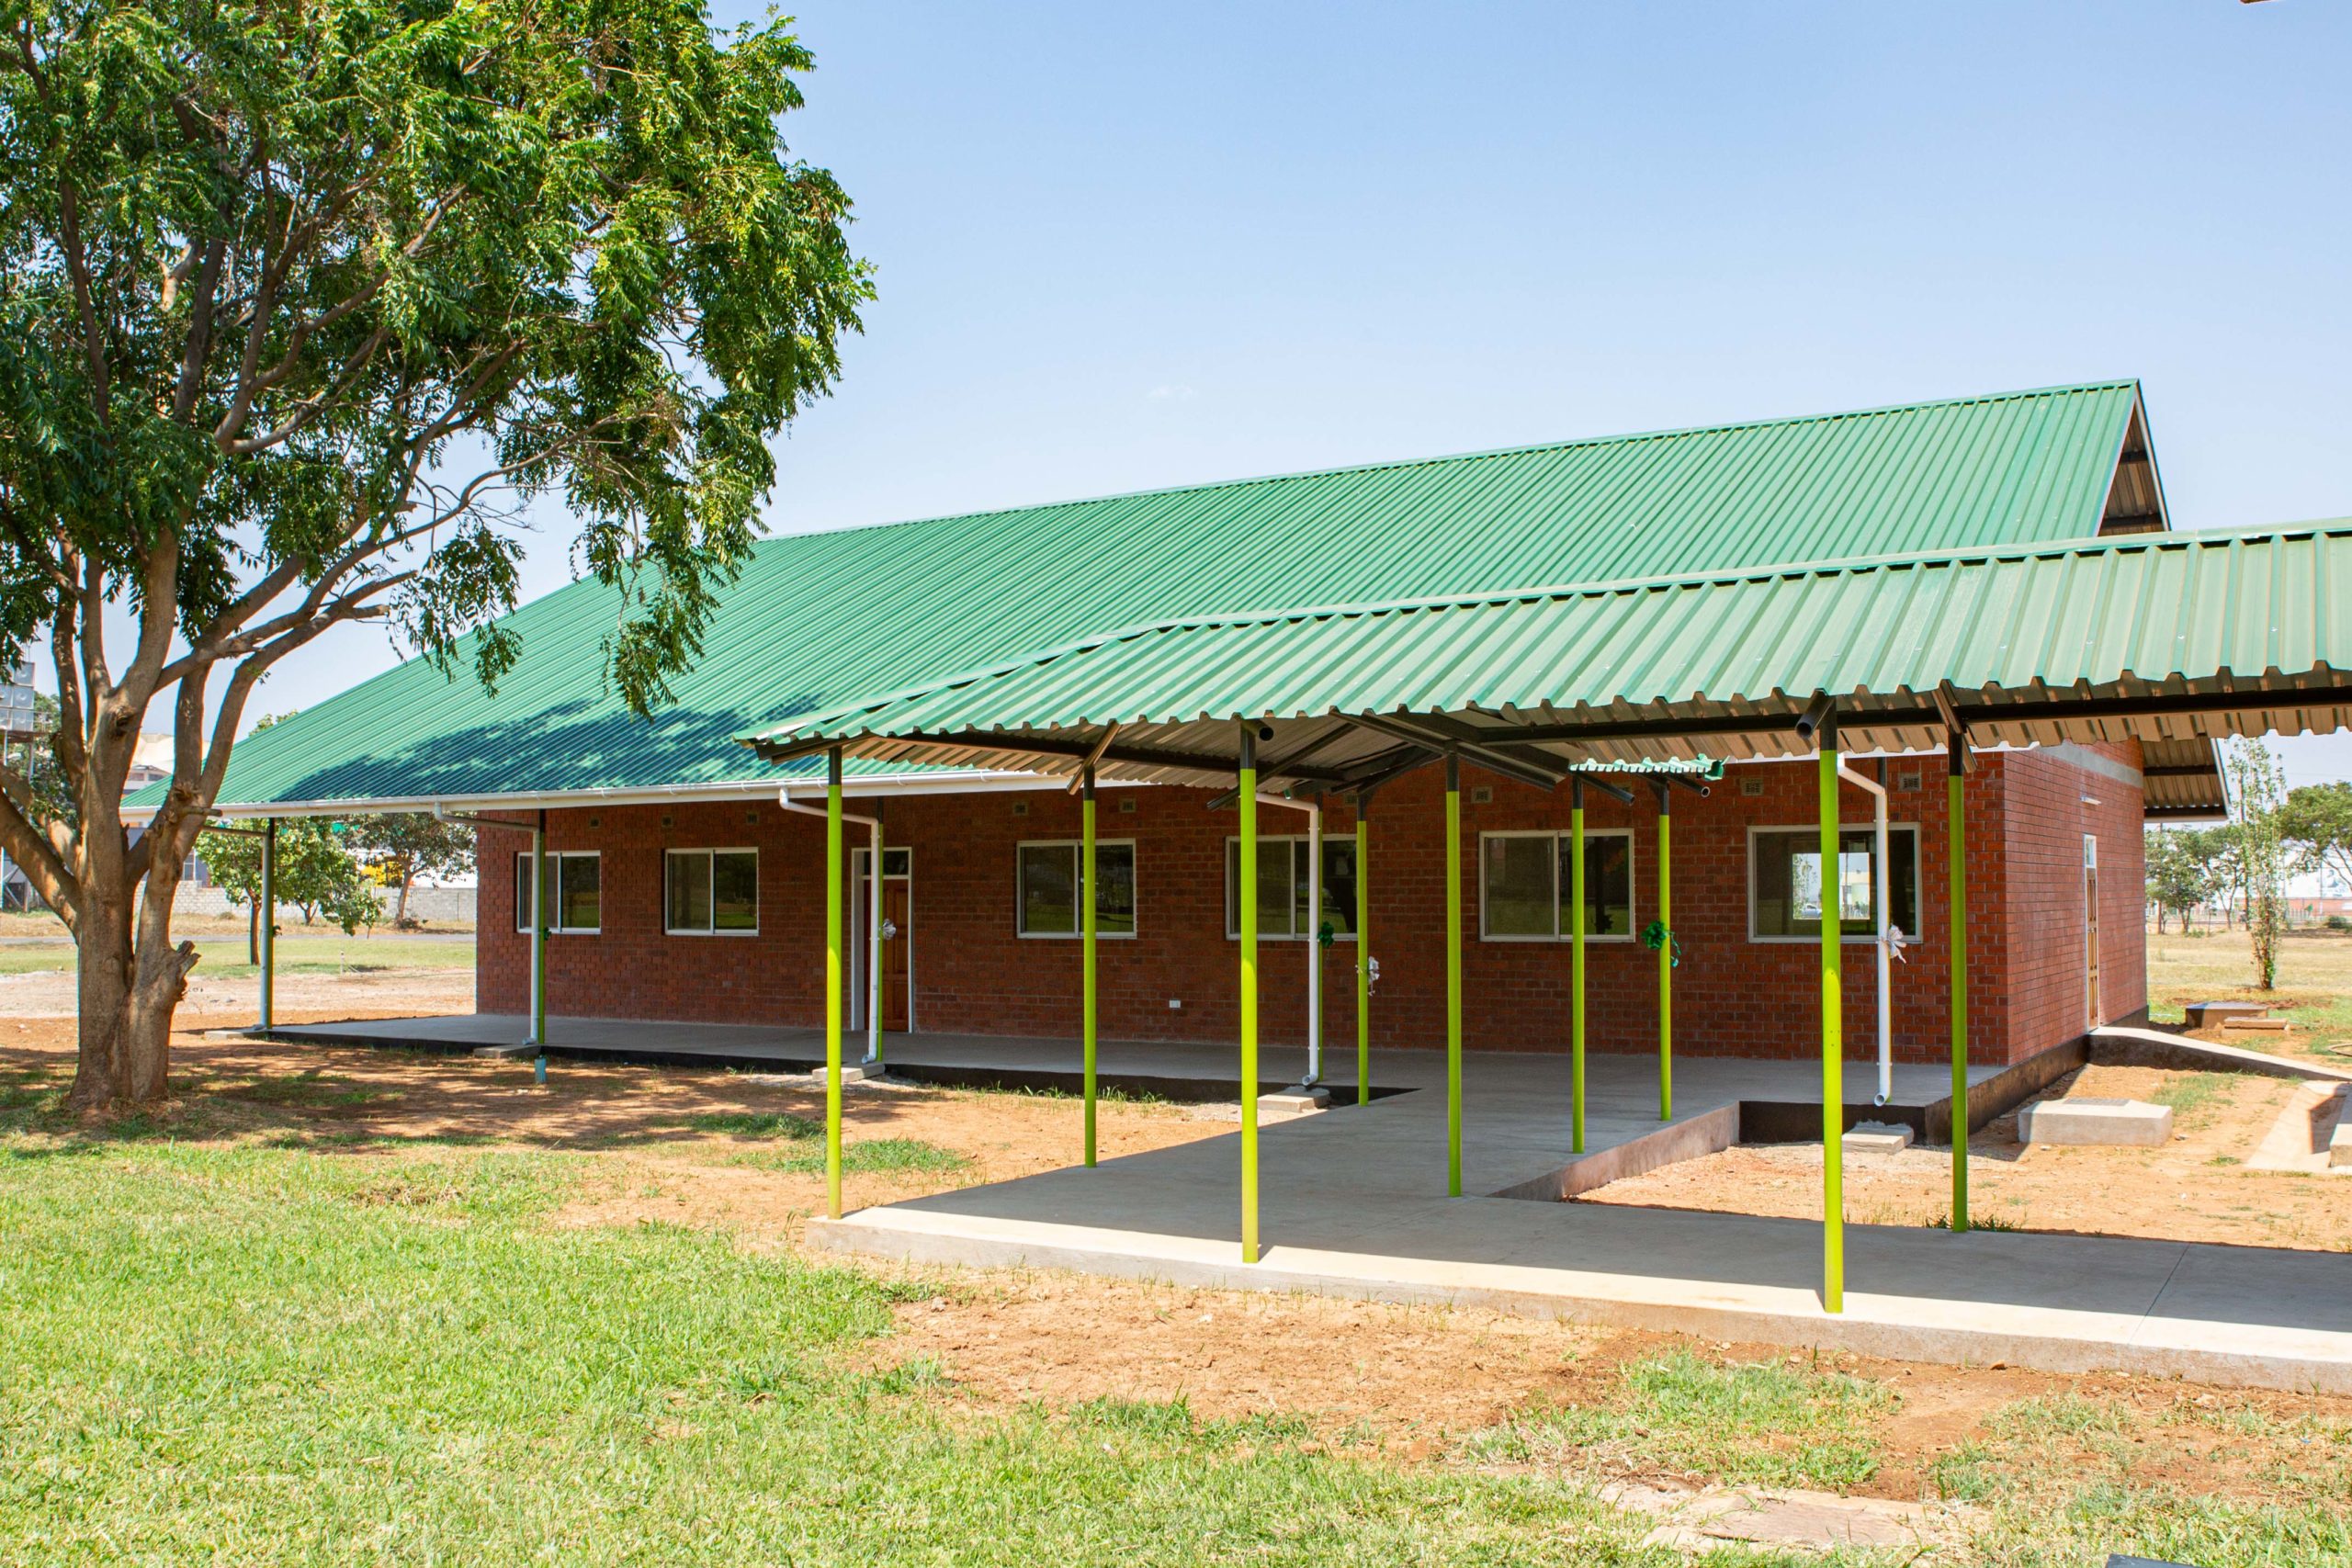 Patient Hostel Completed at CURE Zambia